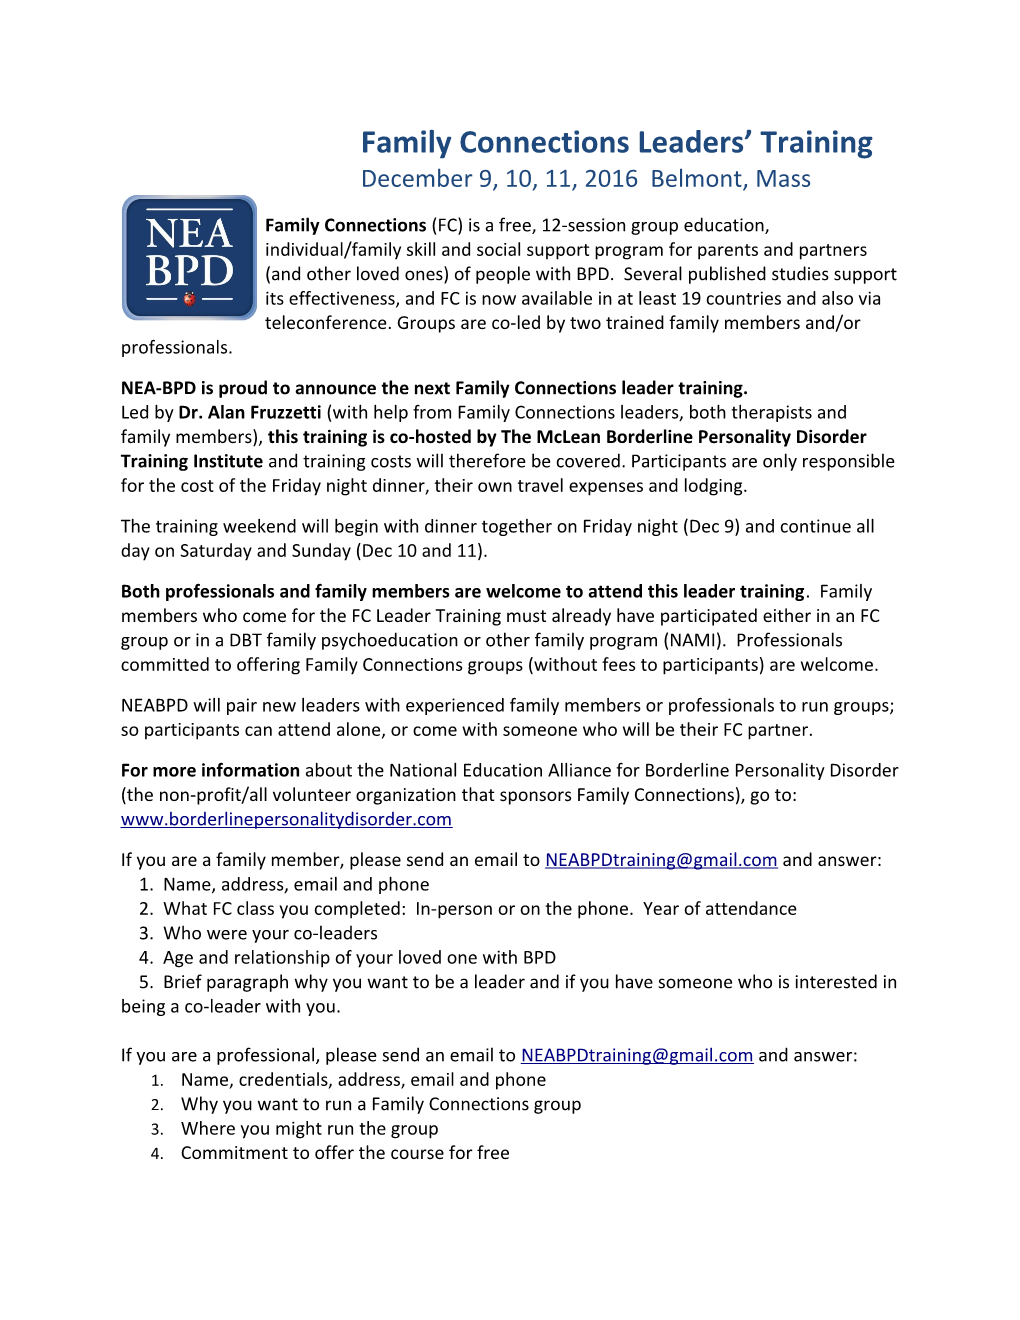 NEA-BPD Is Proud to Announce the Next Family Connections Leader Training